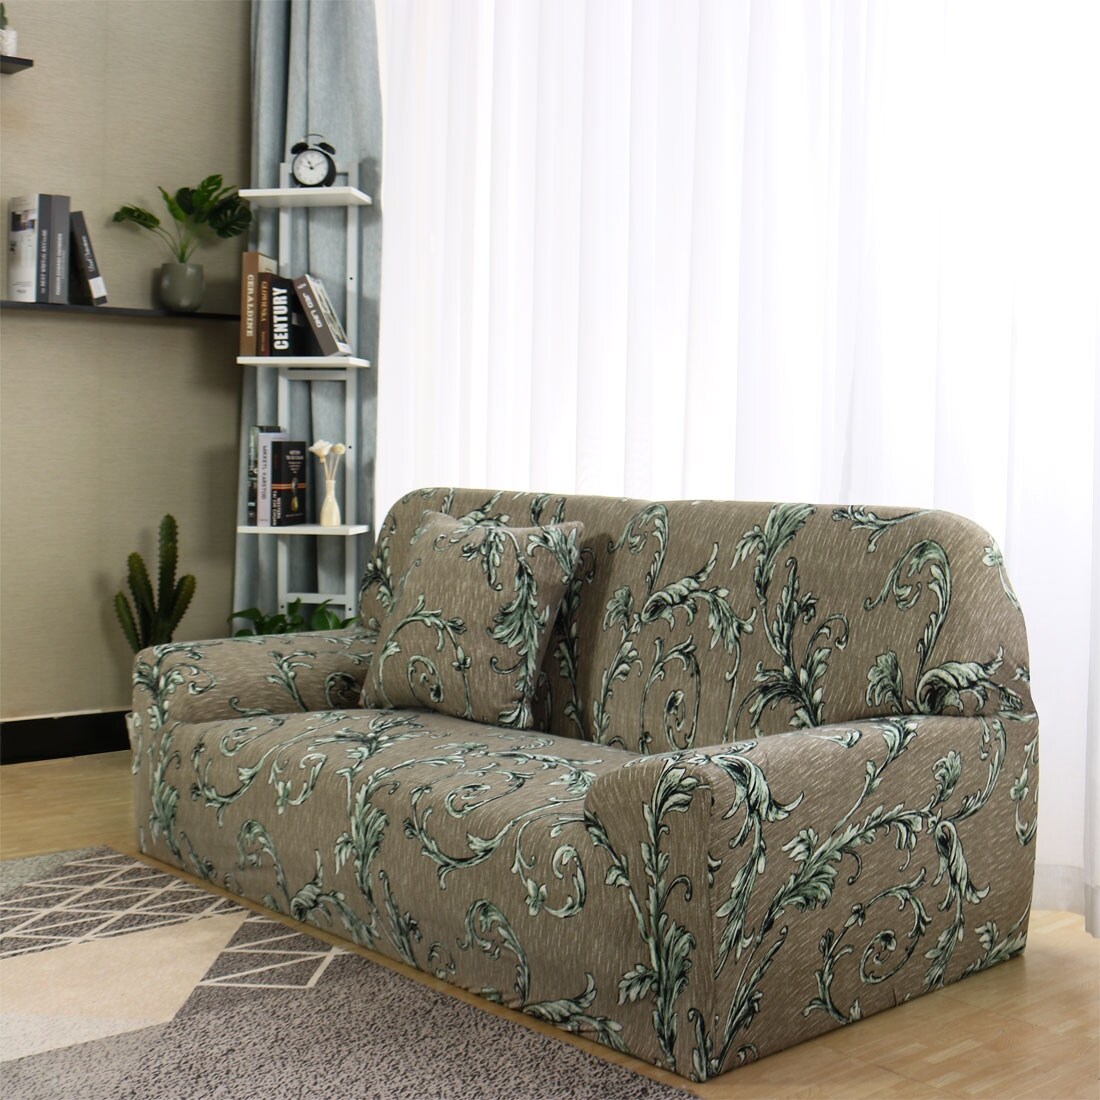 Sofa Covers Anti-Slip,Couch slipcovers Stretch slipcovers Chair Protector Sofa Throws Furniture Armchair Loveseat Anti-mite Polyester-10 1 Seater/Chair